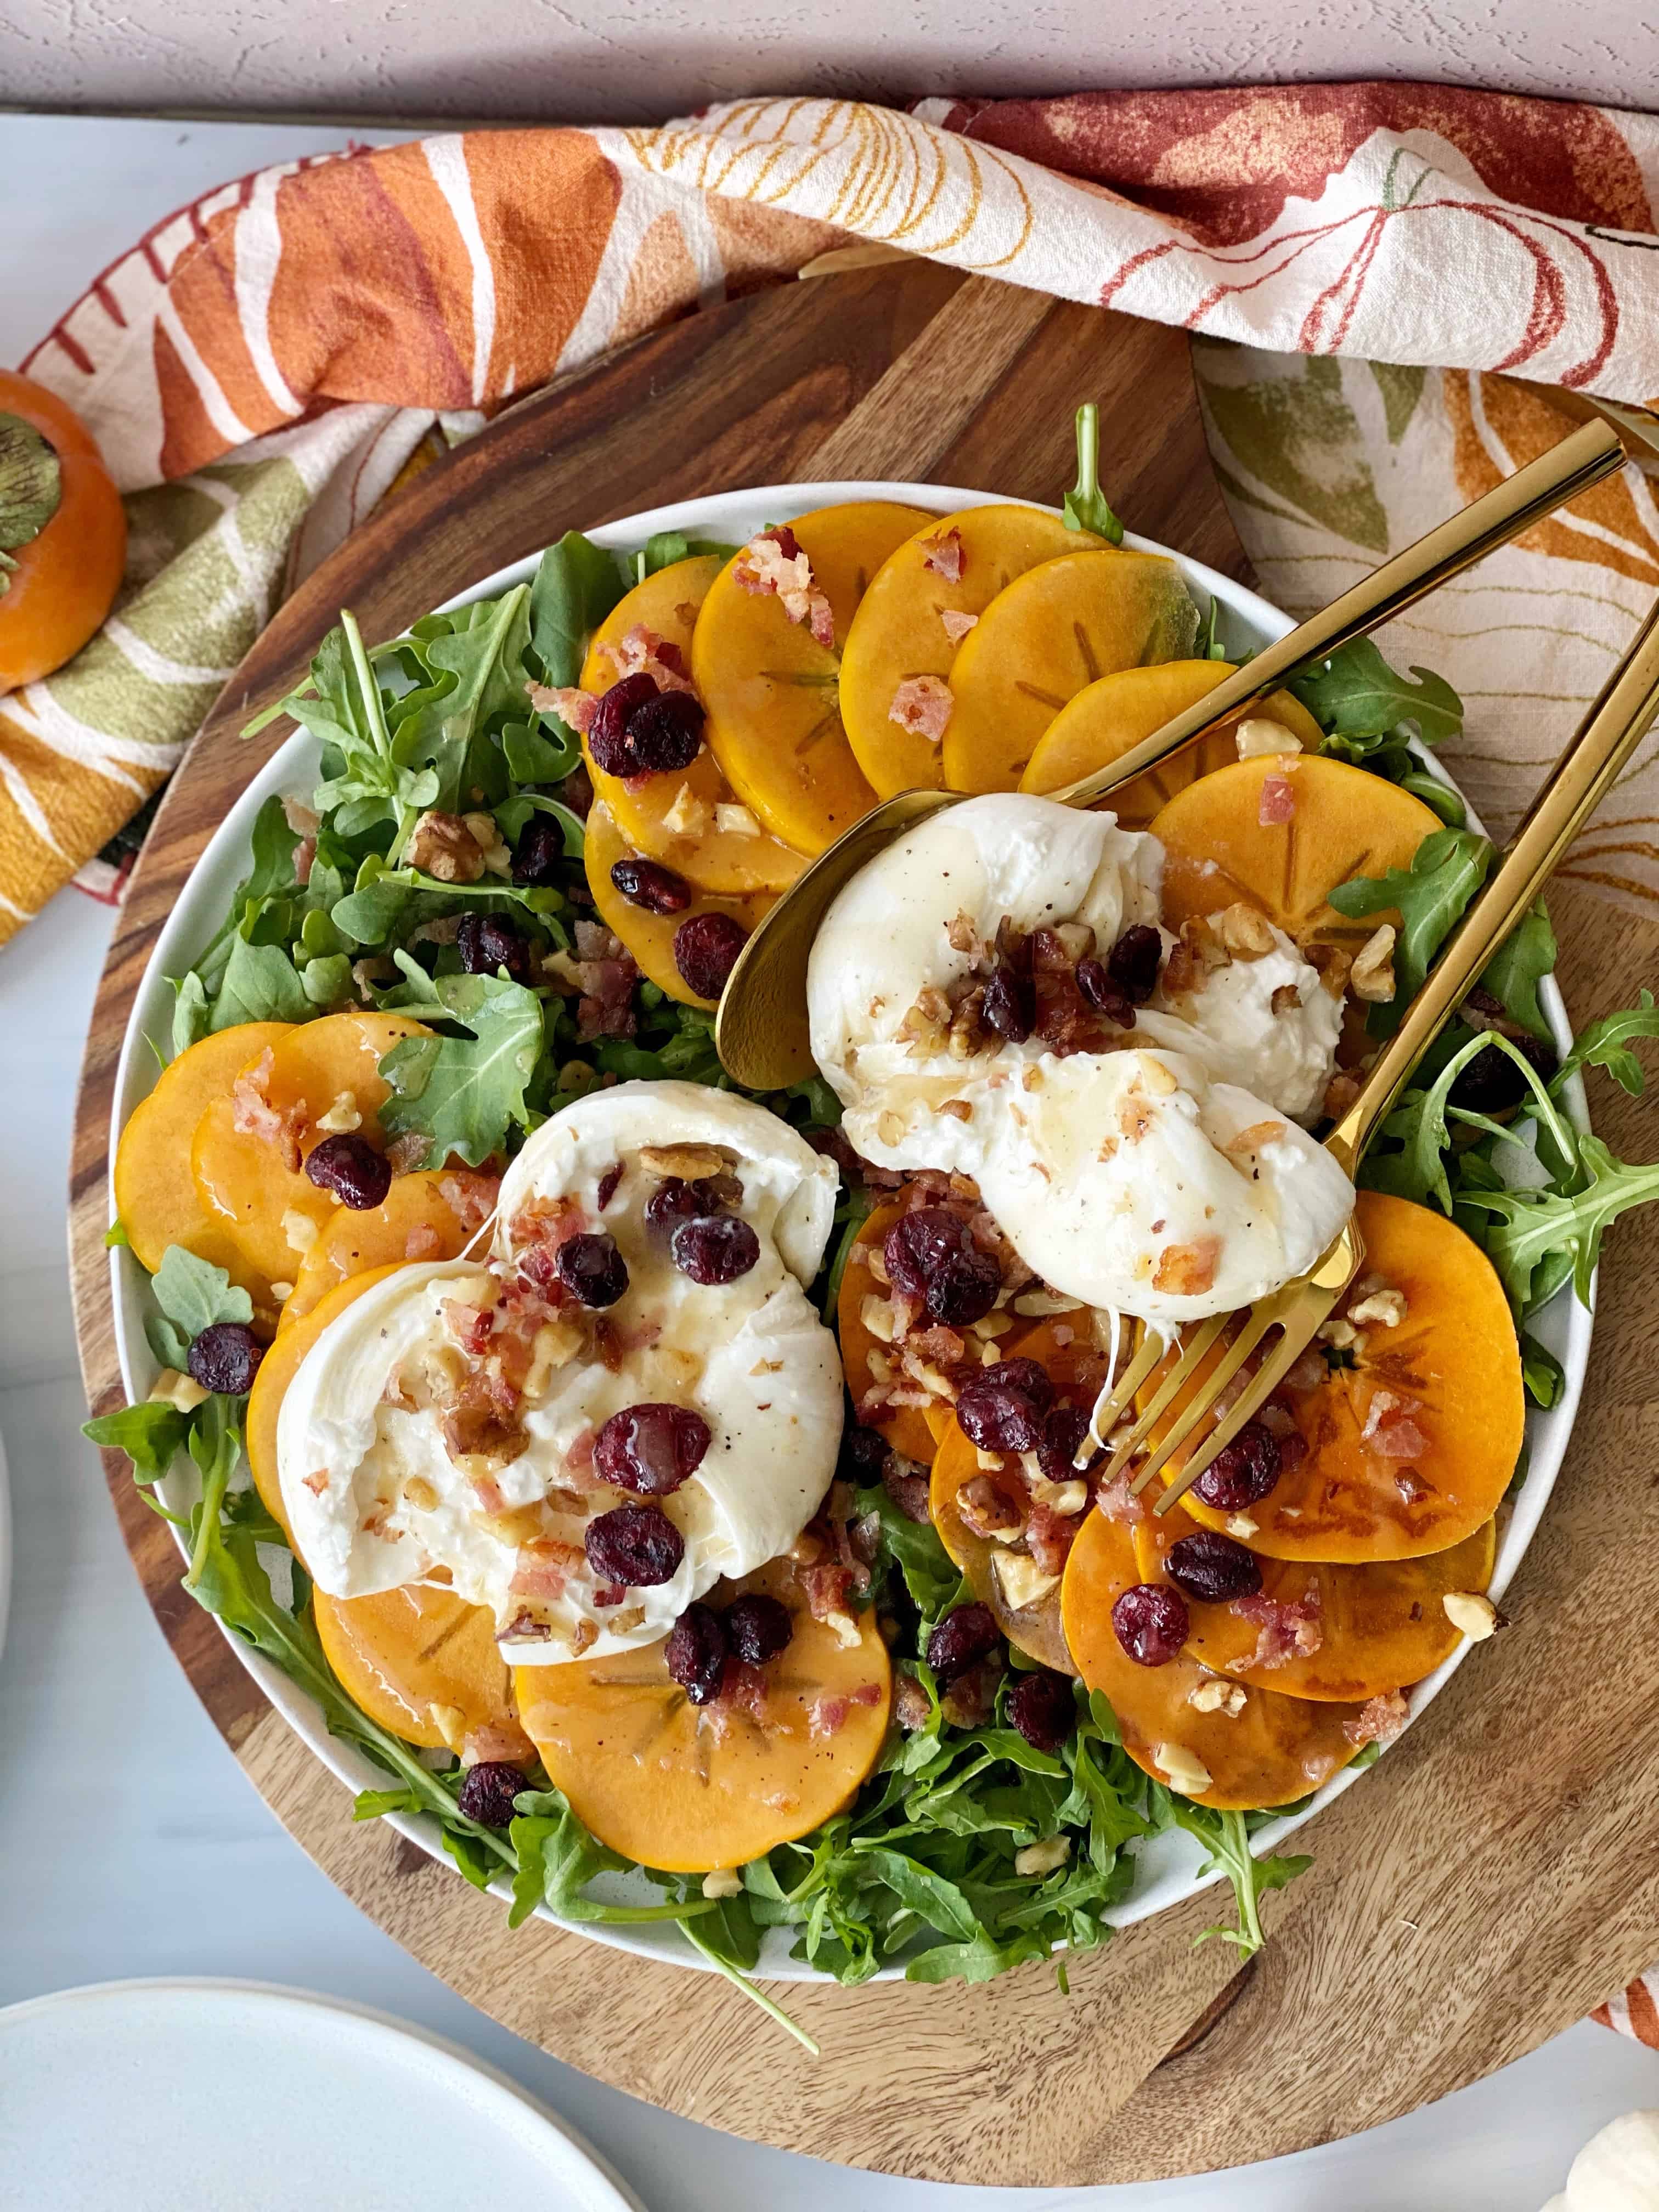 Persimmon Salad with Burrata, Dried Cranberries, Bacon, and Walnuts